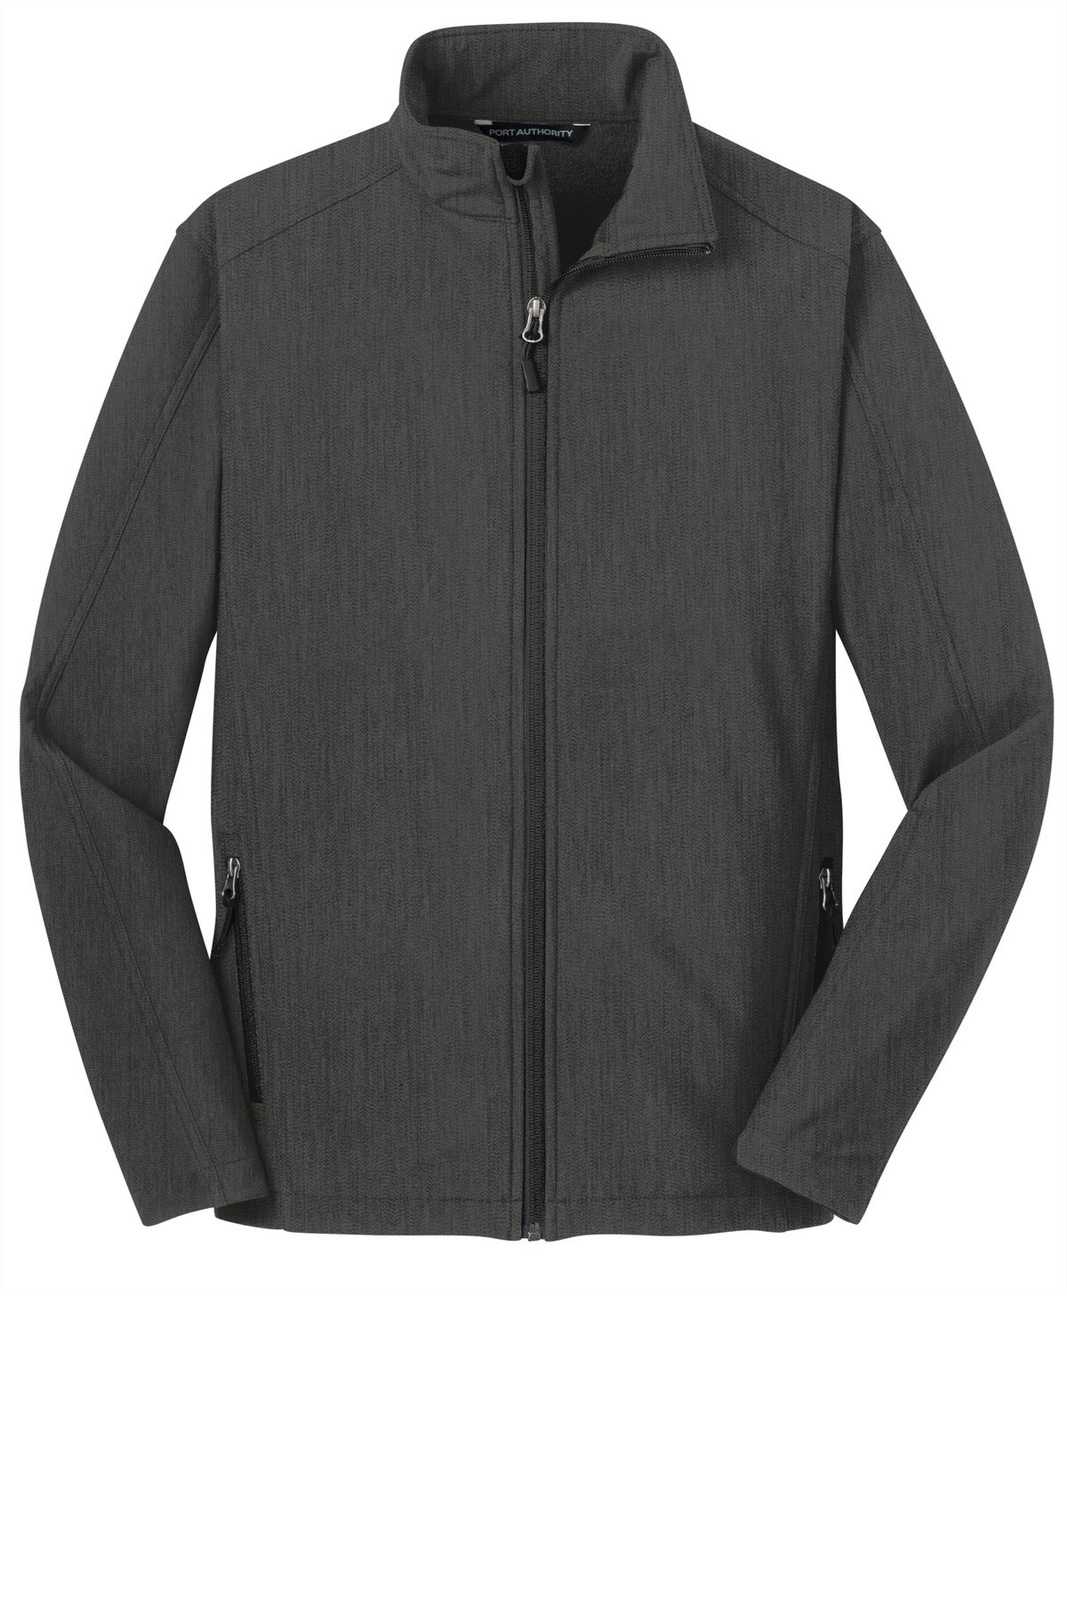 Port Authority J317 Core Soft Shell Jacket - Black Charcoal Heather - HIT a Double - 5